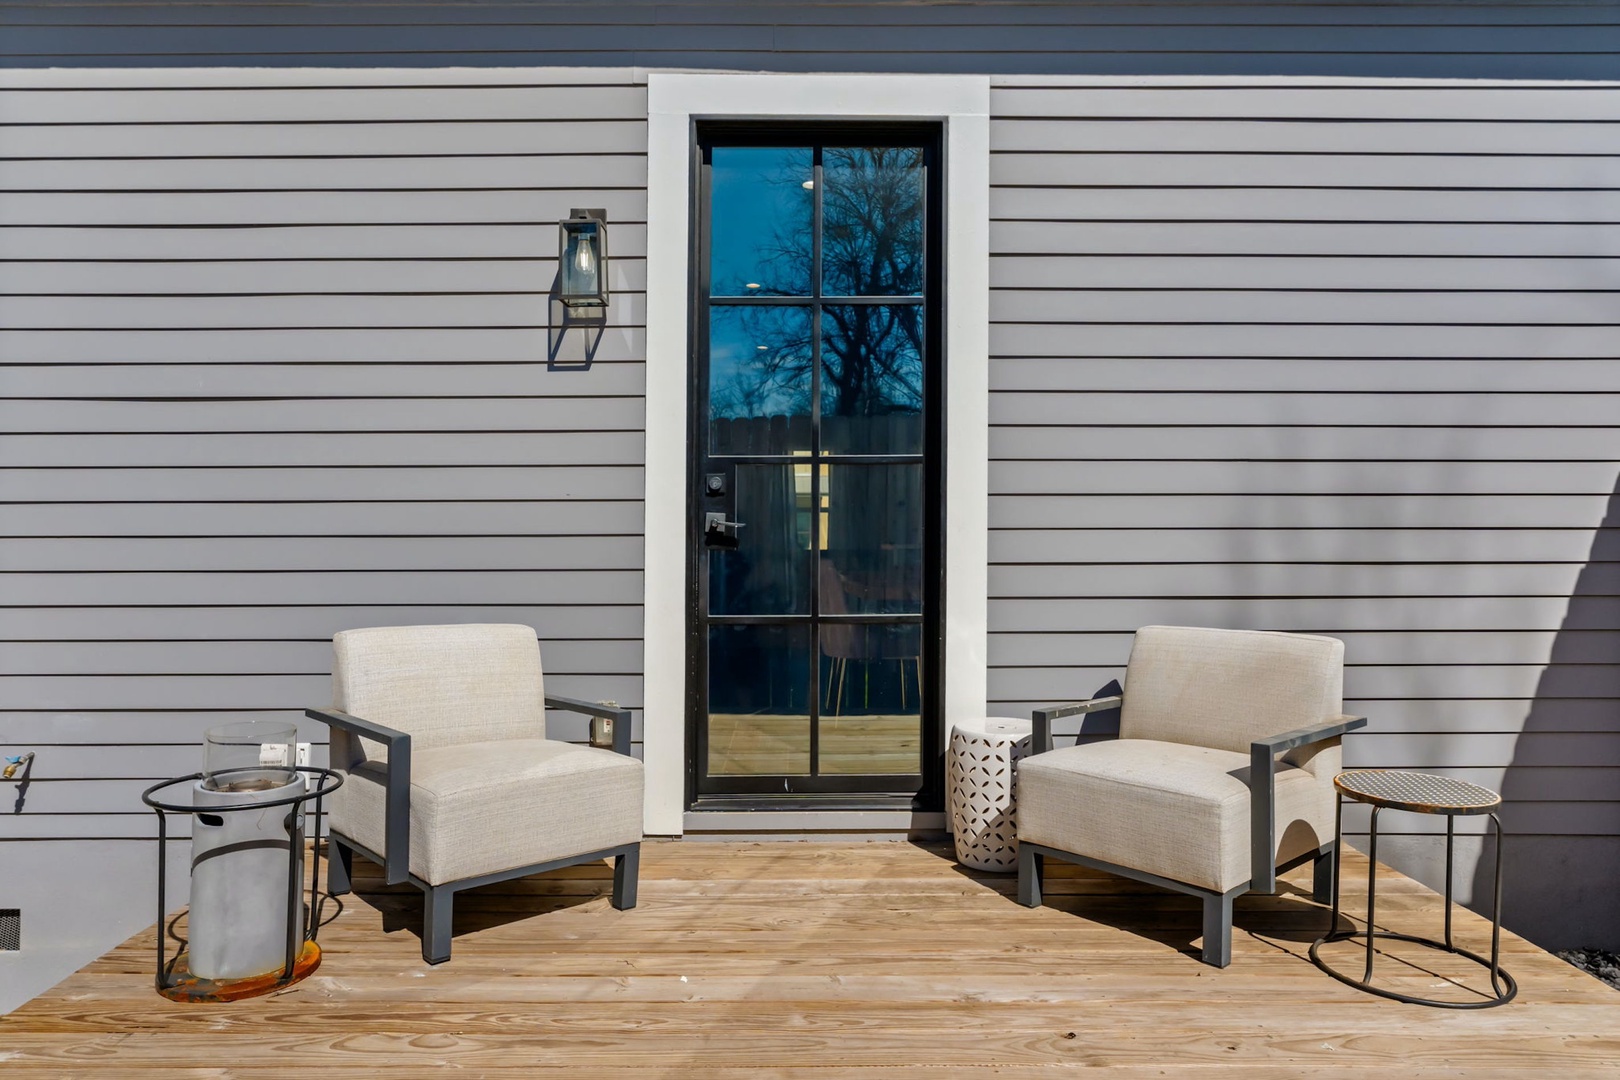 Step onto the tranquil back patio & enjoy your morning coffee